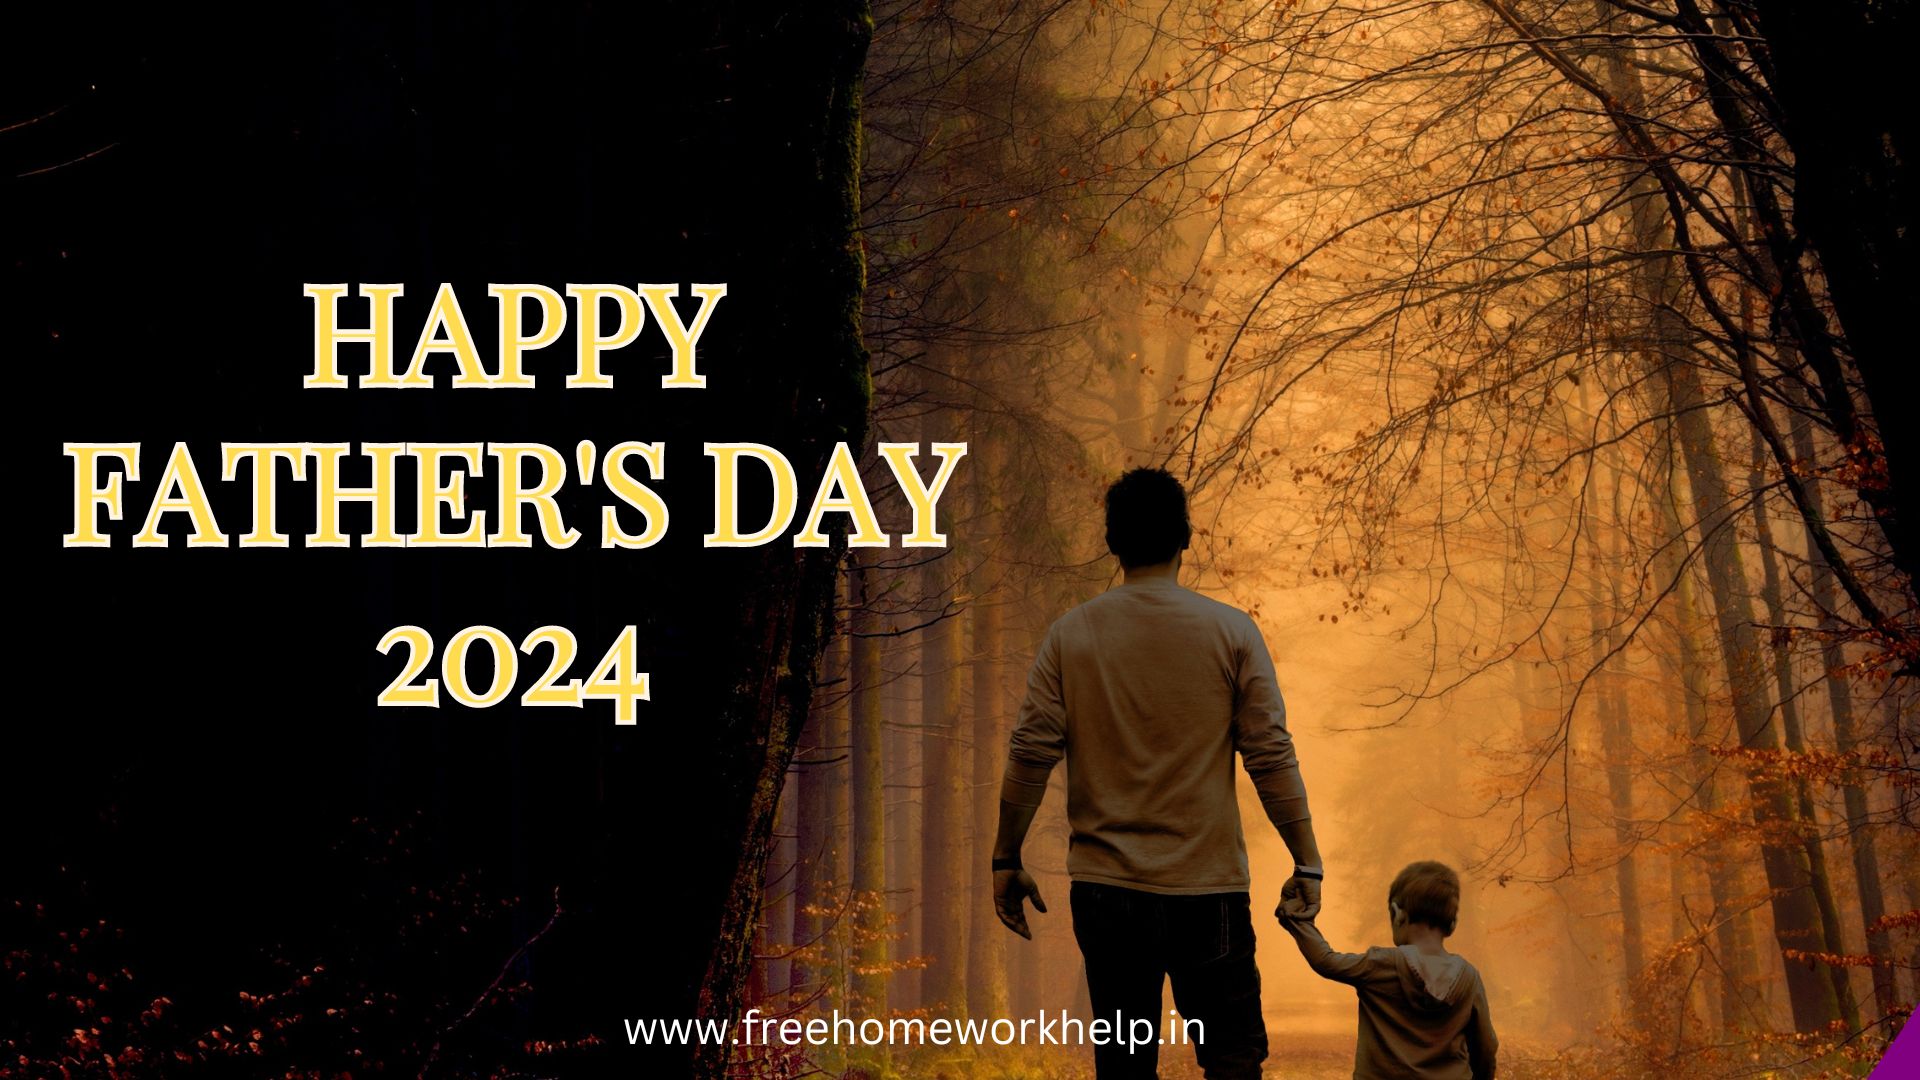 Father's day 2024